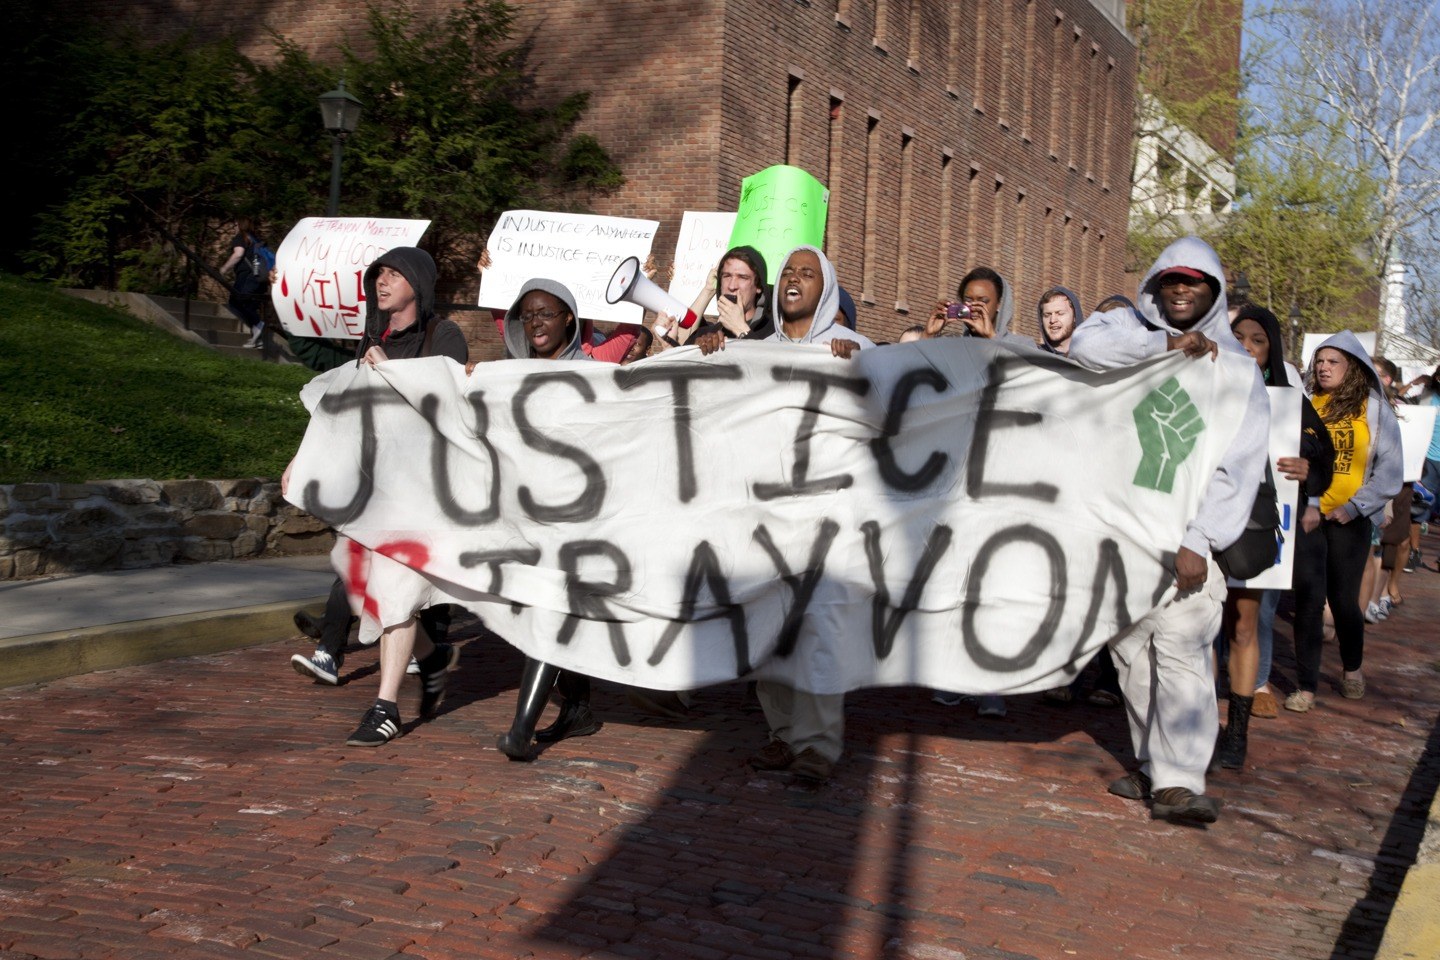 Protesters march through campus after the rally for Trayvon Martin, 2012